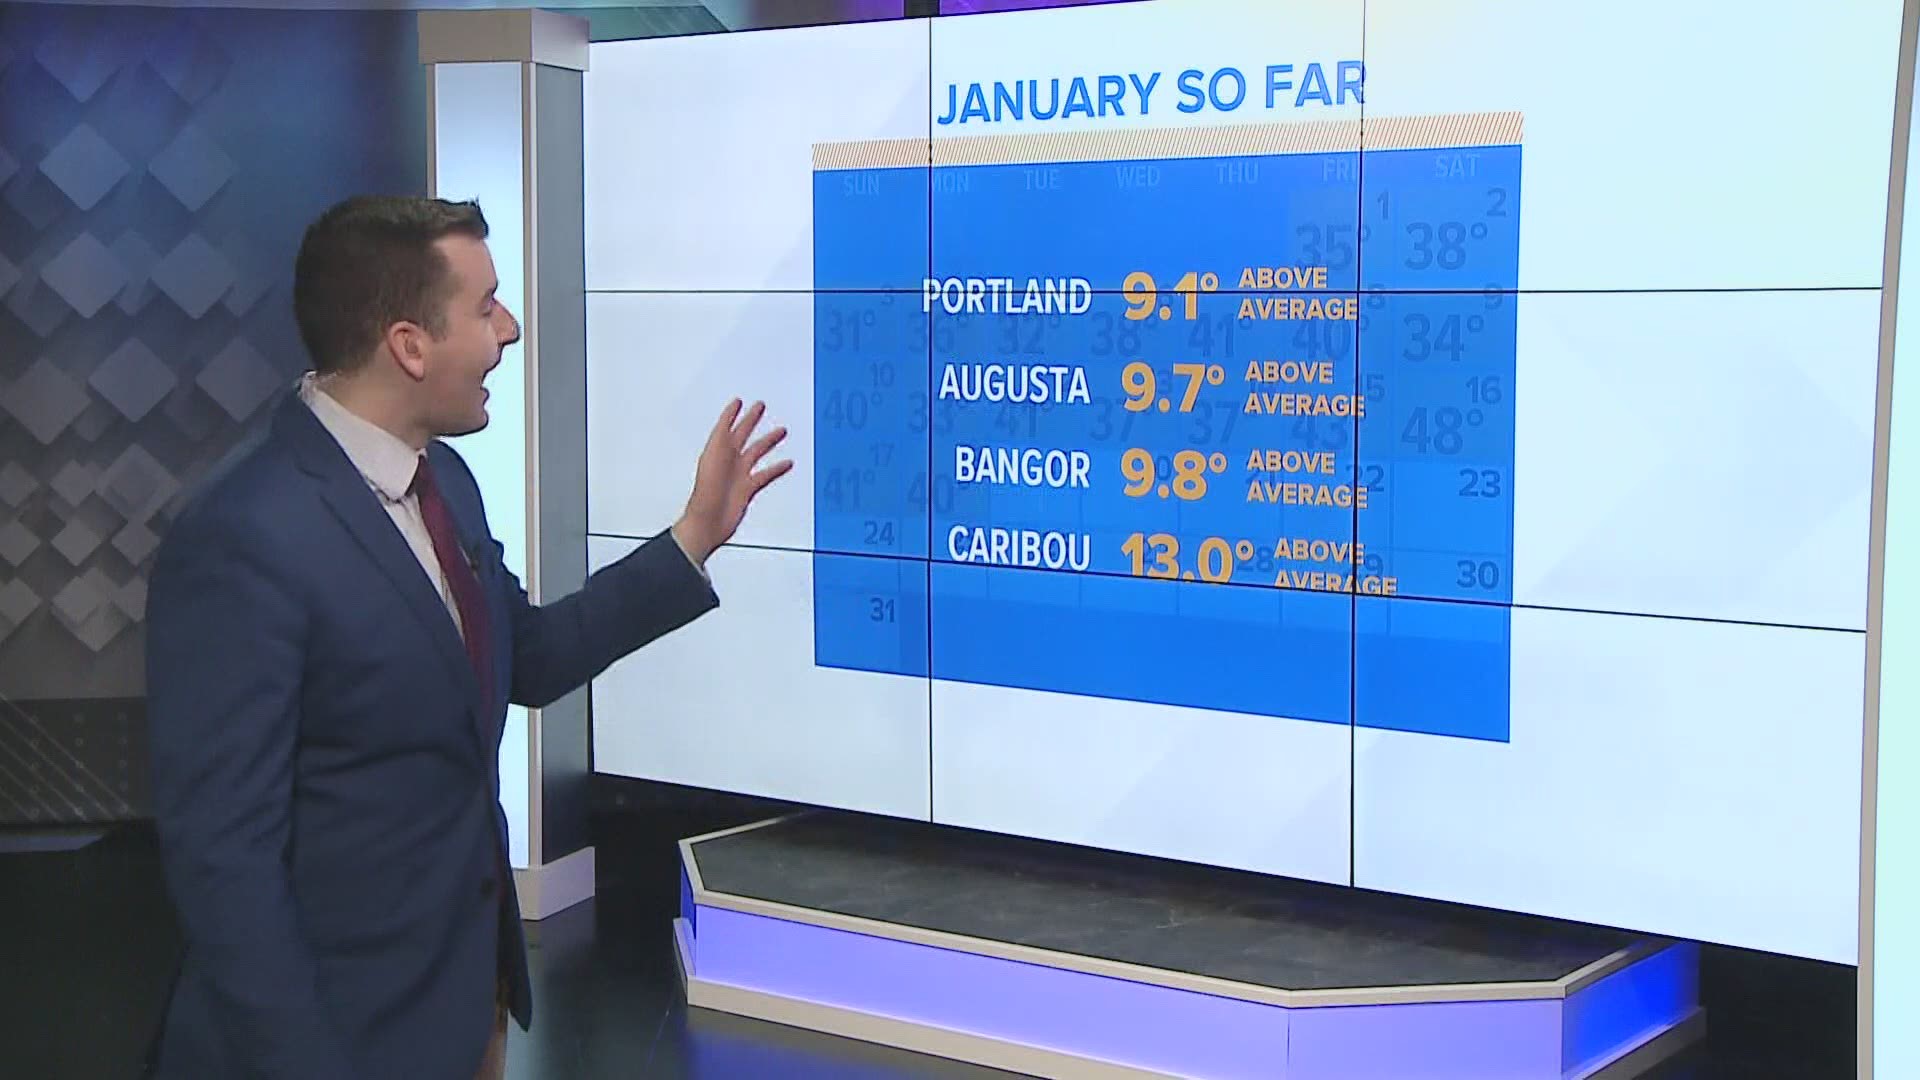 NEWS CENTER Maine's Meteorologist Ryan Breton discusses more about the mild weather Maine is having. It's been 28 days since Portland has seen below-average temps.